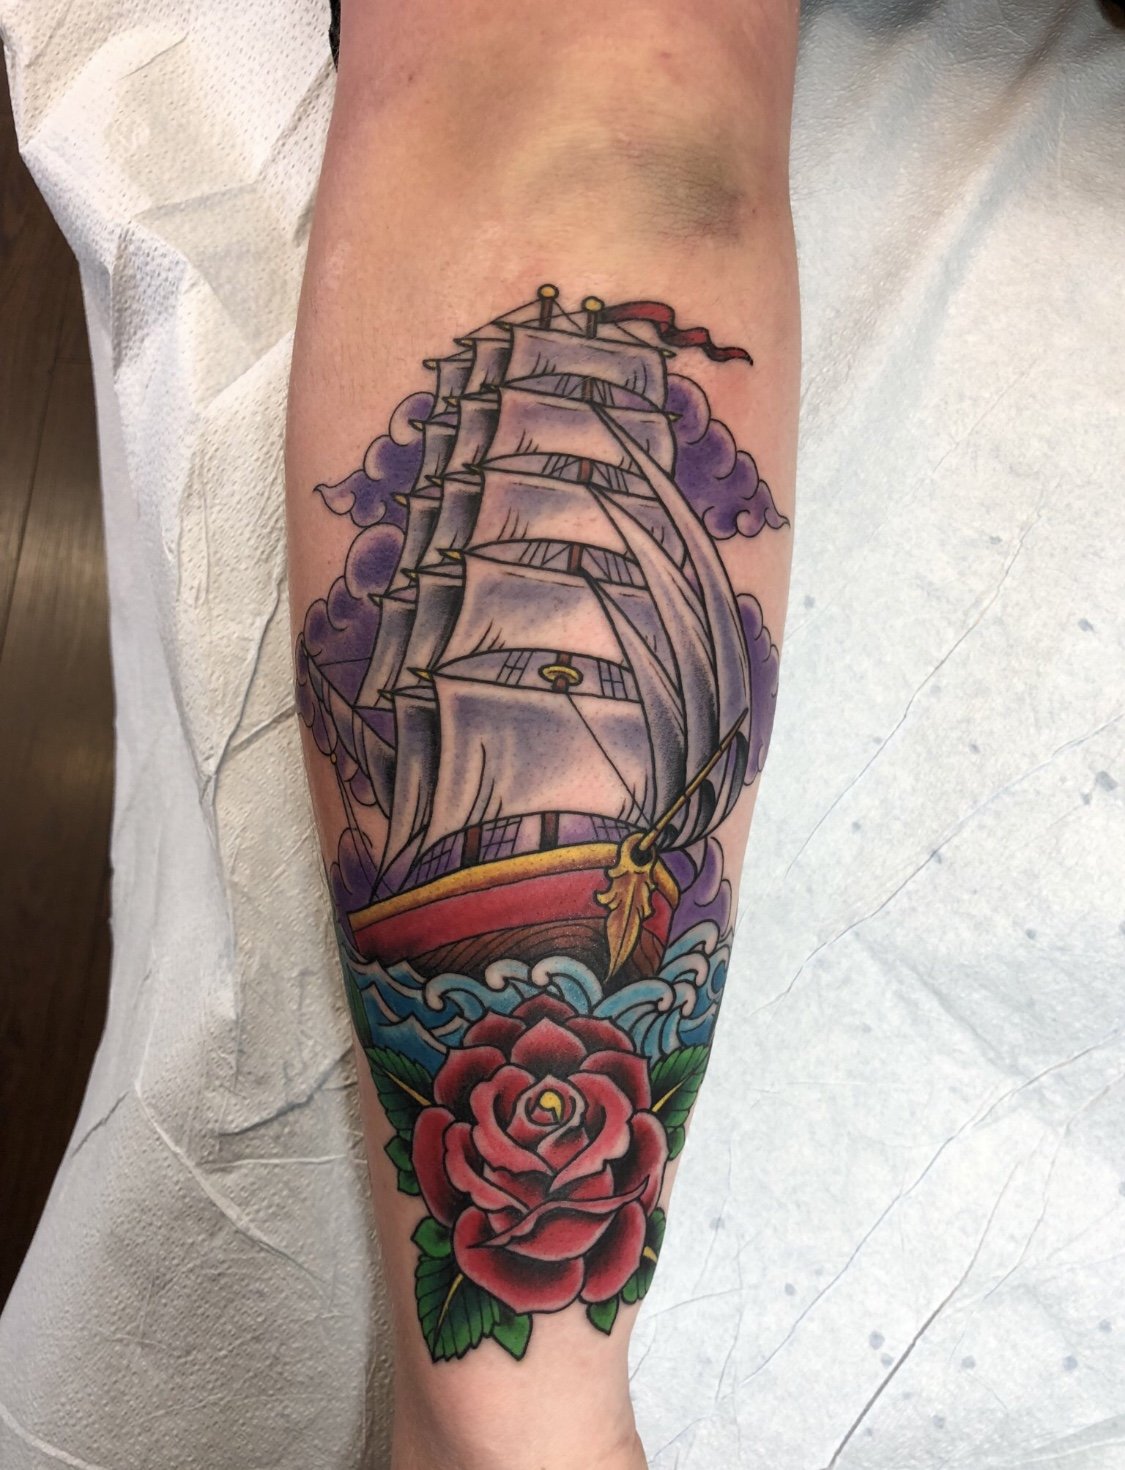 Clipper Ship and Rose